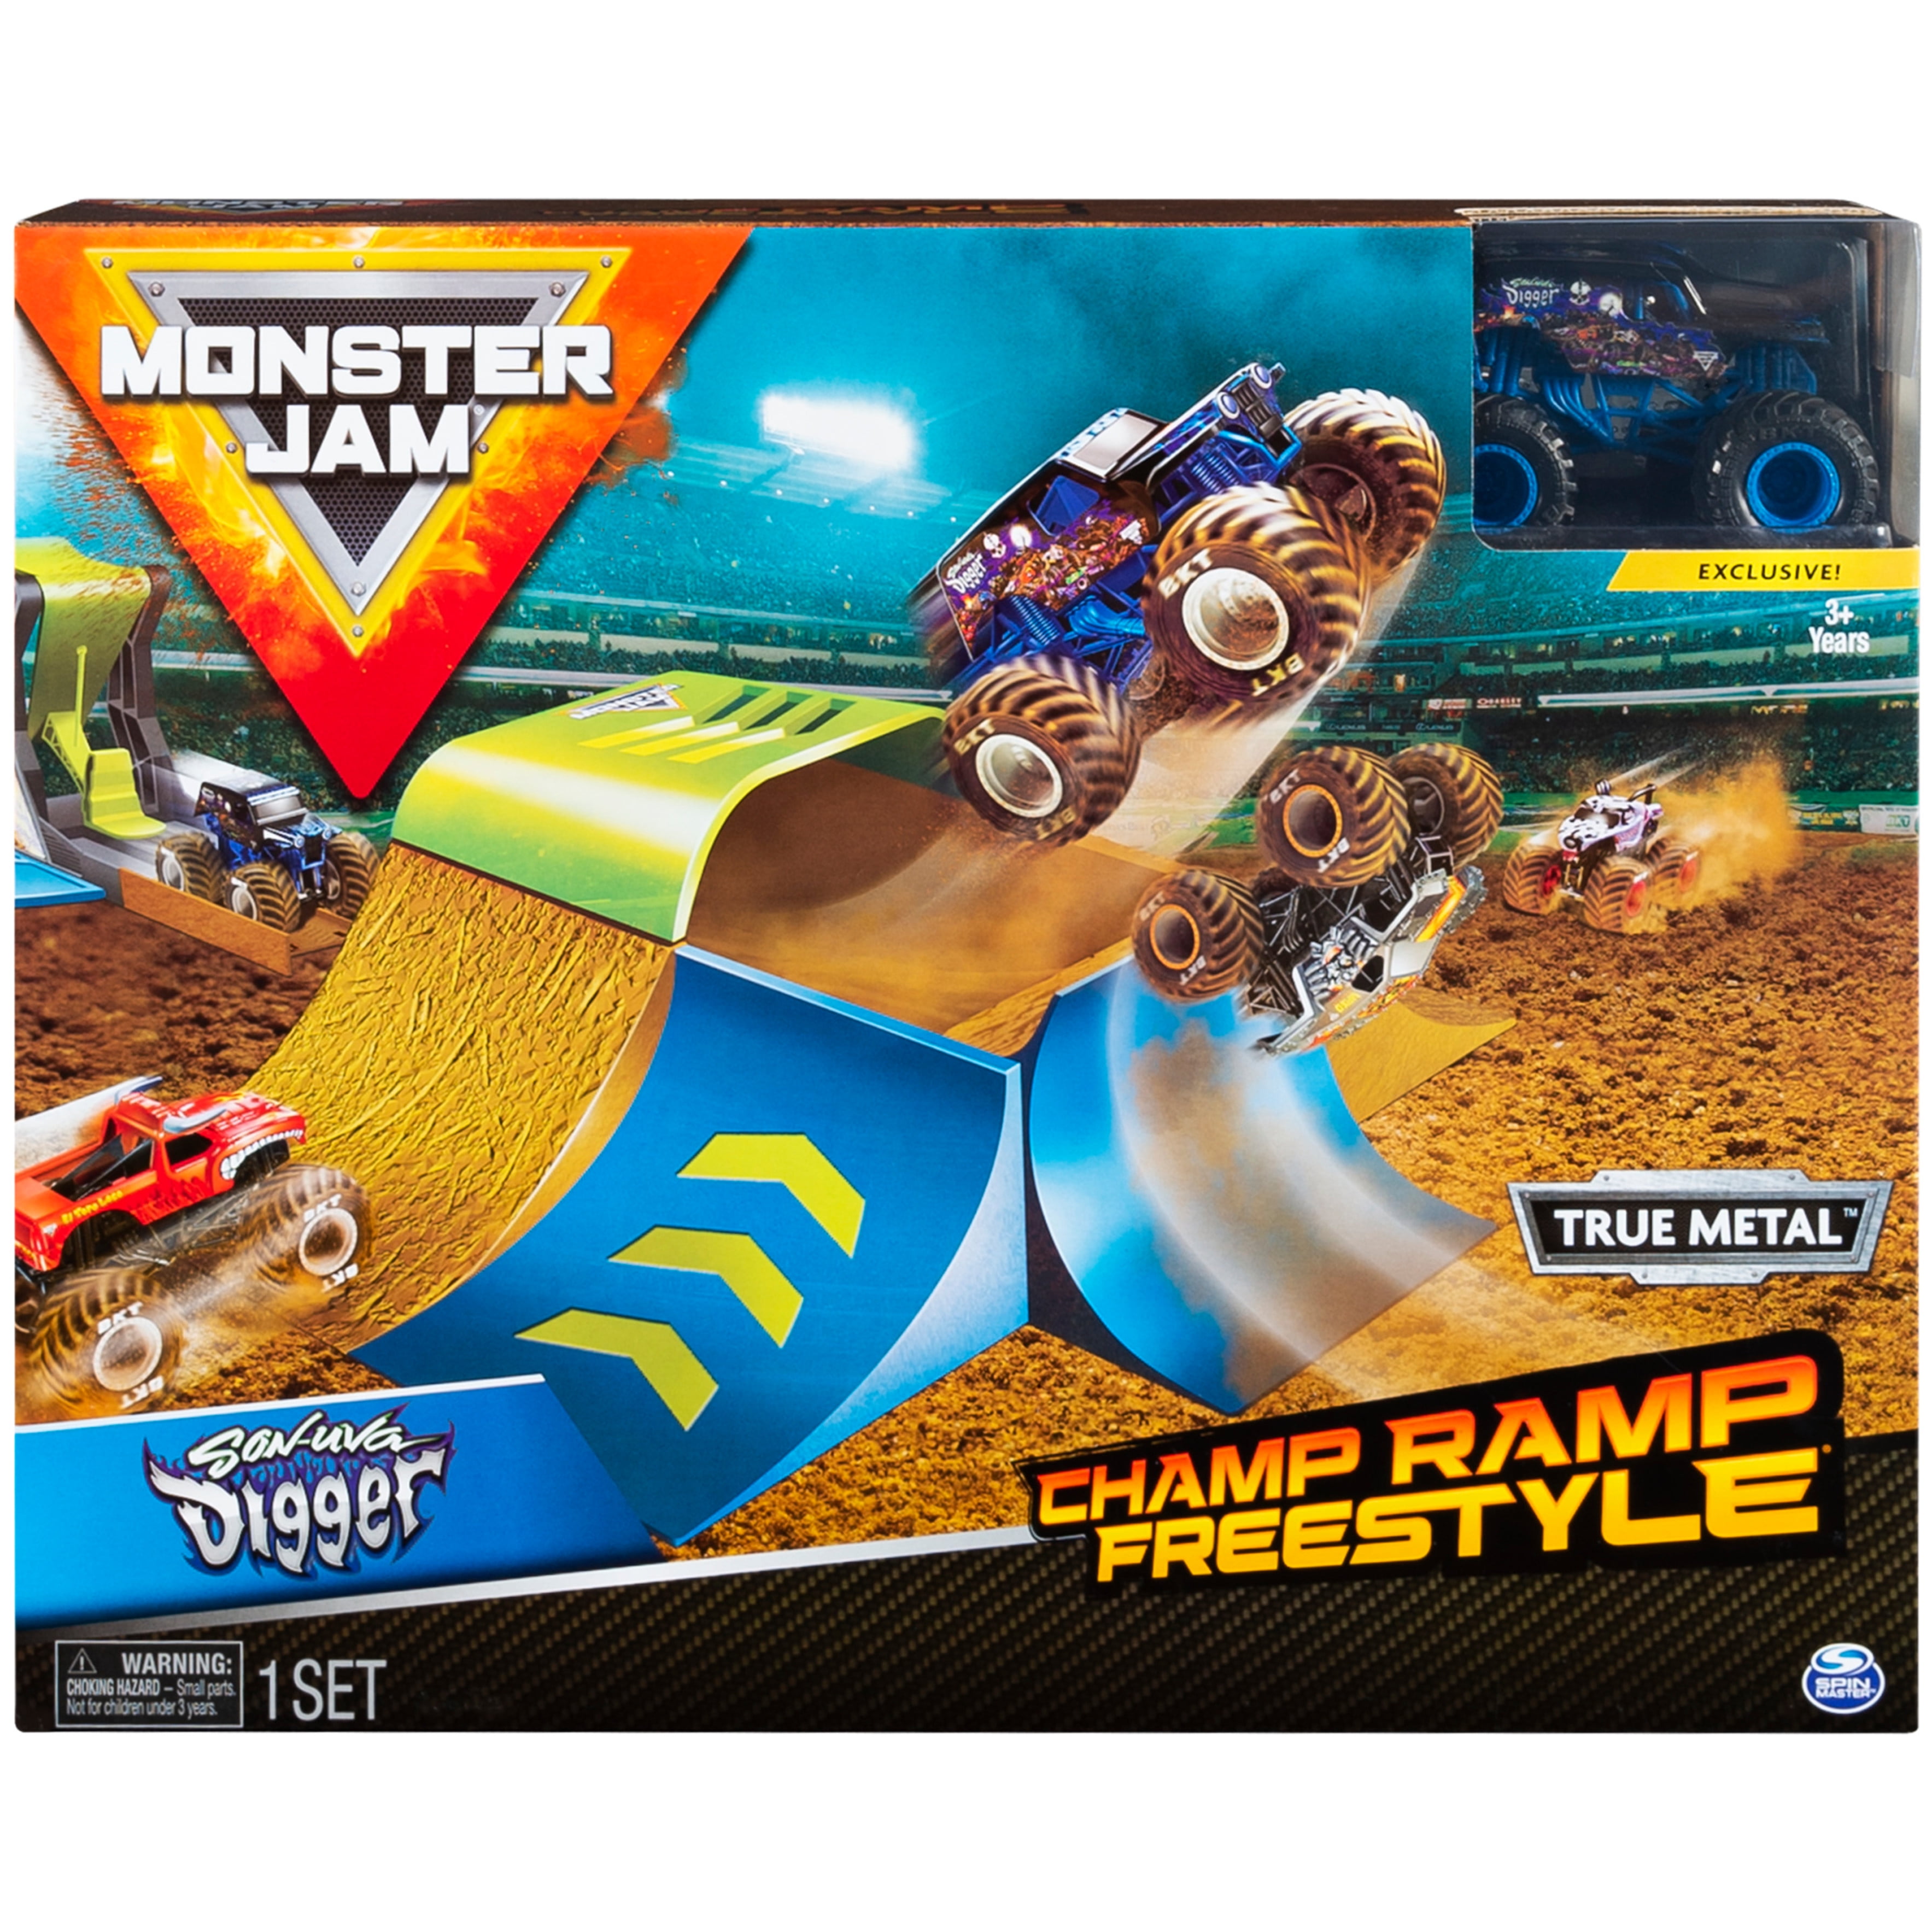 Monster Jam, Official Champ Ramp Freestyle Playset Featuring Exclusive 1:64  Scale Die-Cast Son-uva Digger Monster Truck